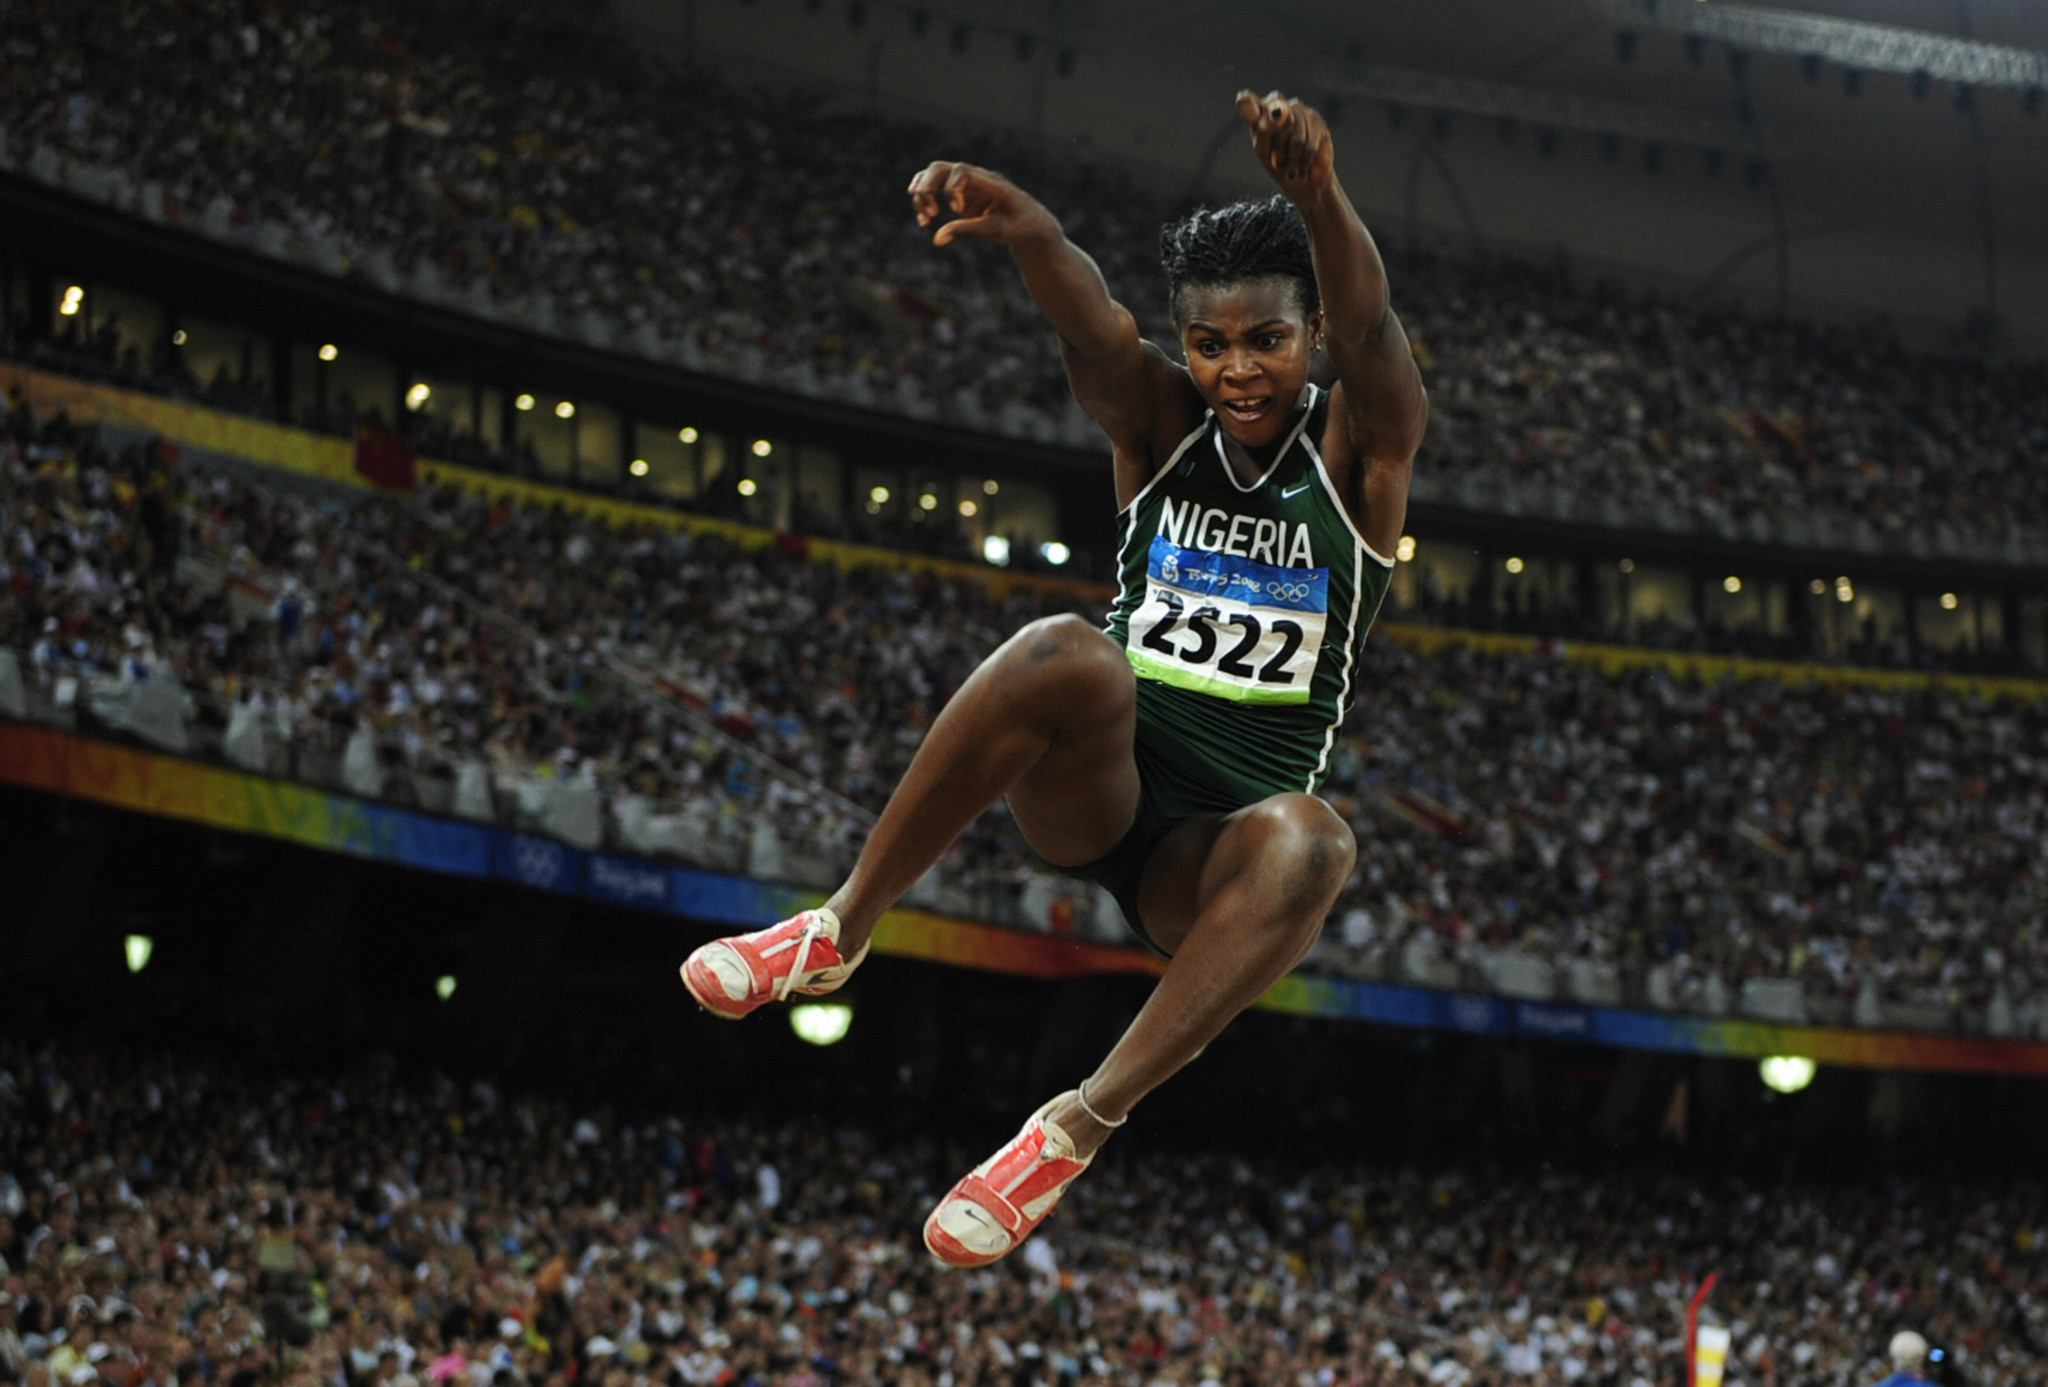 Blessing Okagbare won an Olympic silver at Beijing 2008 ©Getty Images